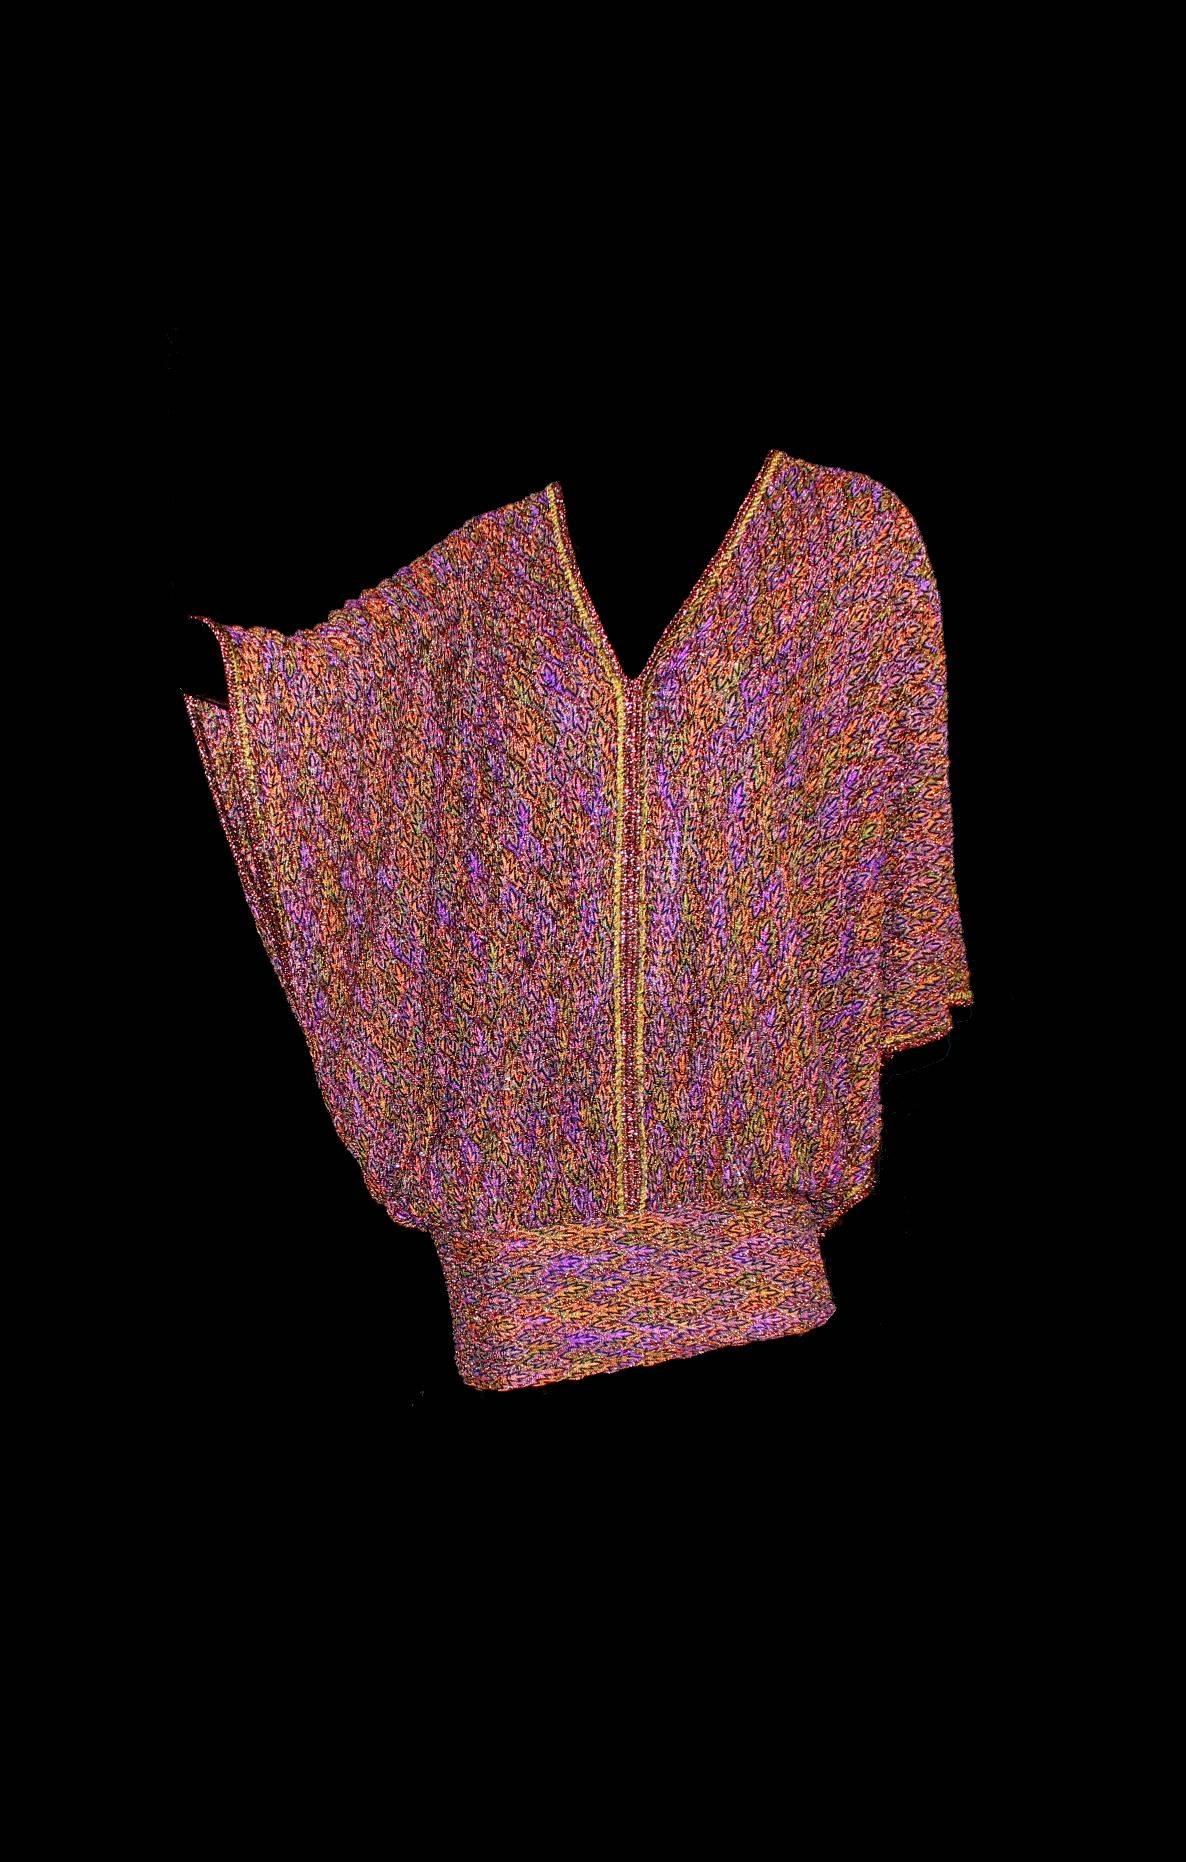 Beautiful multicolored lurex MISSONI kaftan dress
Classic MISSONI signature knit
Simply slips on
V-Neck
Batwing sleeves
Crochet-knit details - so beautiful!
Dry Clean only
Made in Italy
Size 44
New, unworn